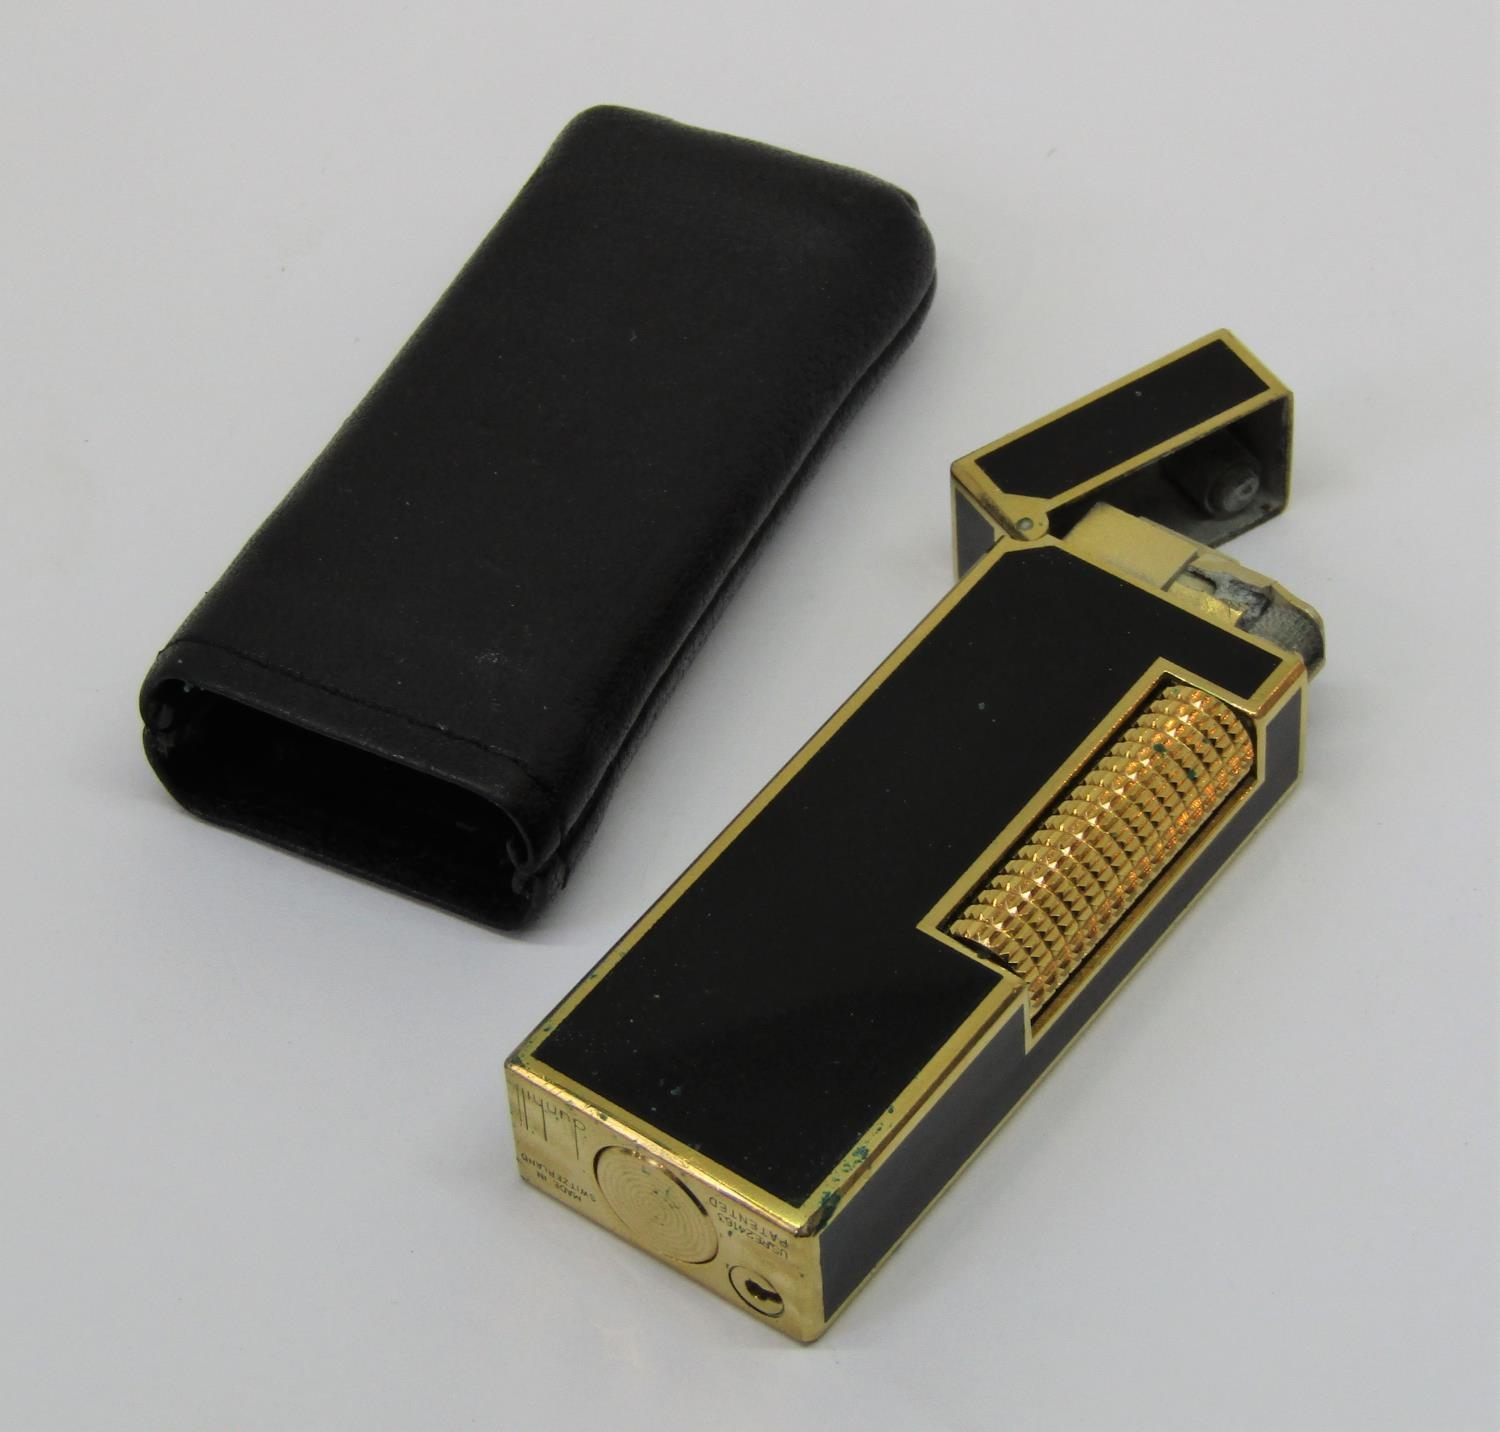 Dunhill enamel and gold plated lighter, patented US. RE24163, within a leather pouch, 6.5 cm high